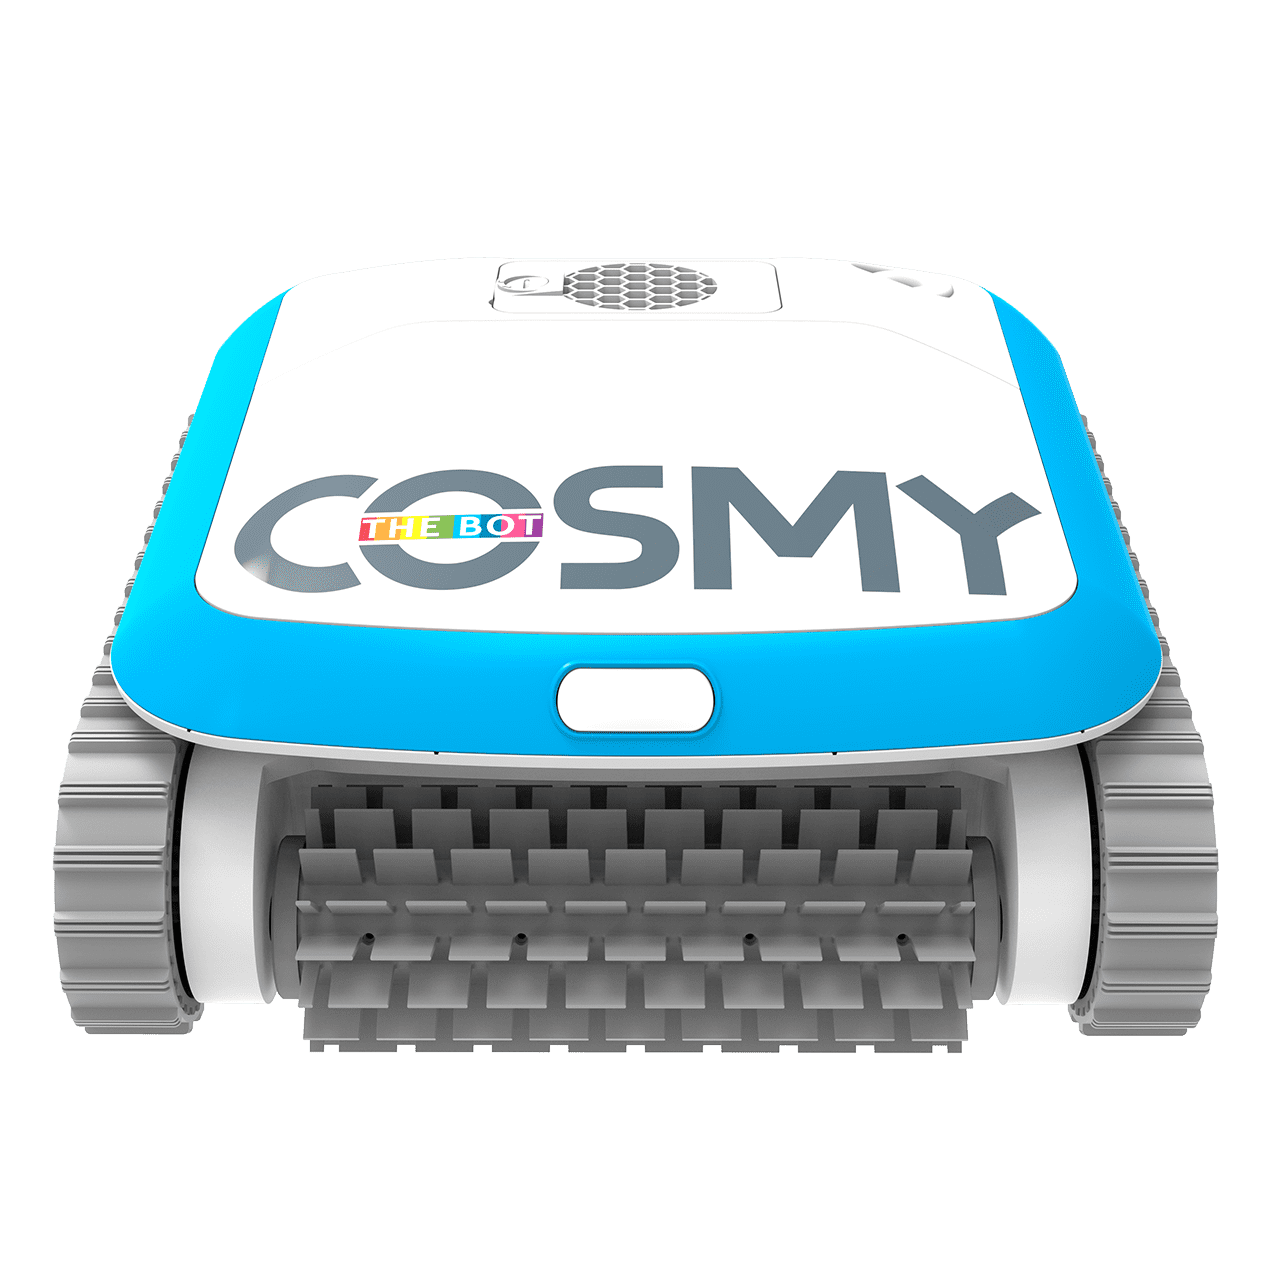 BWT Poolroboter Cosmy 150